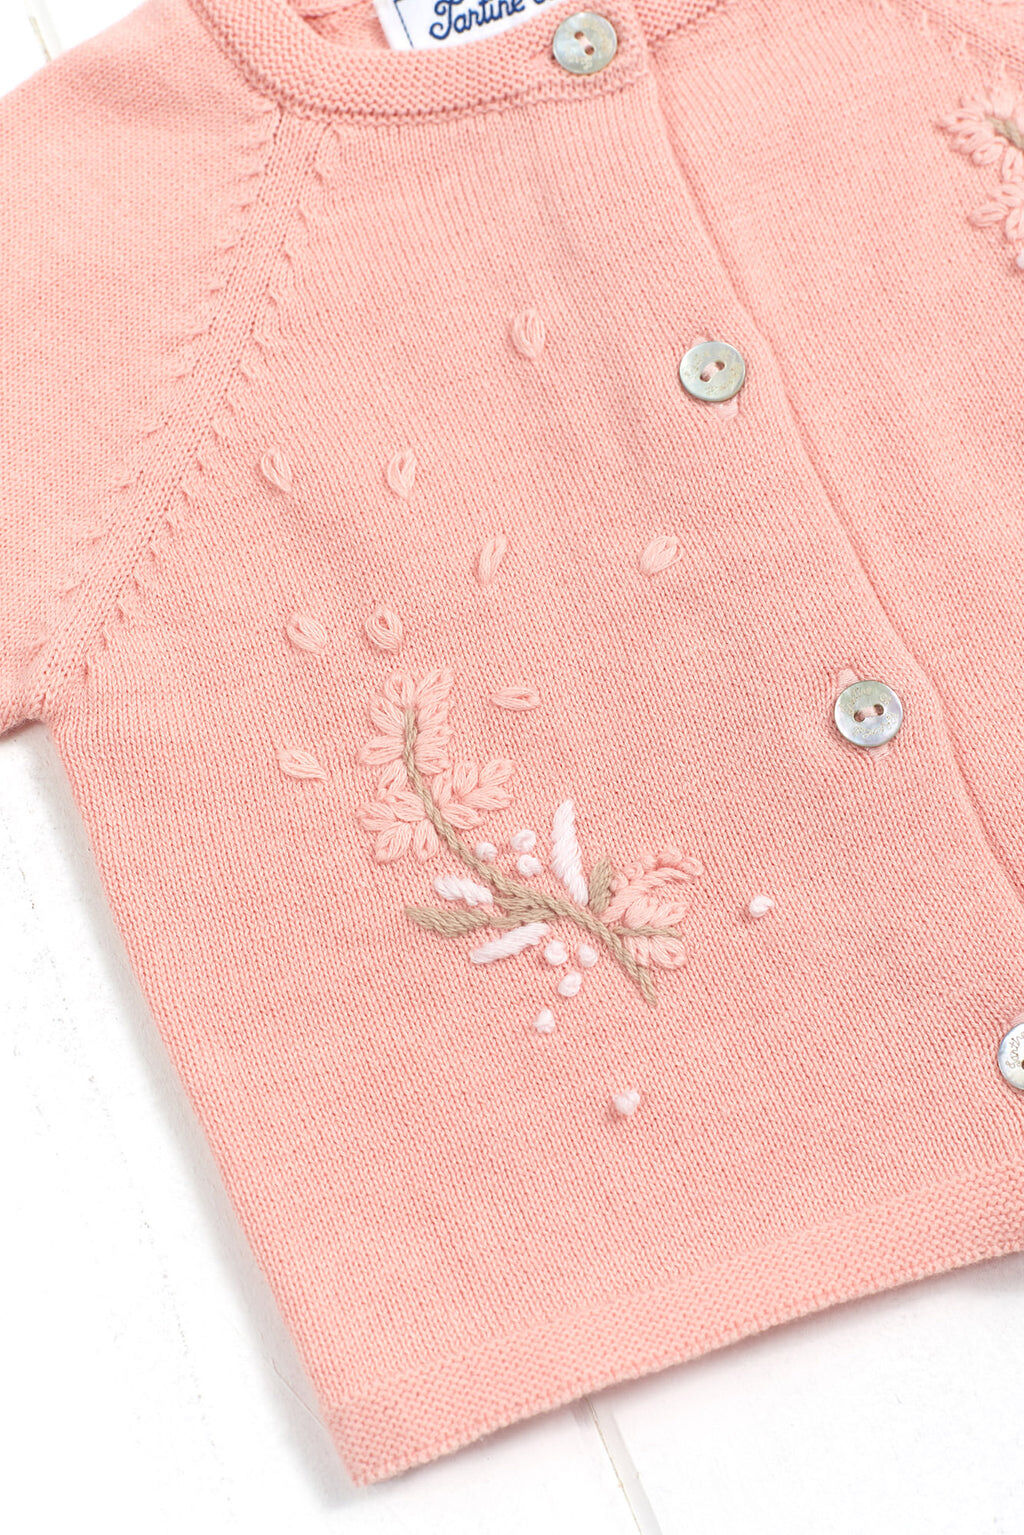 Cardigan - Cotton Knit peony flower embroidery